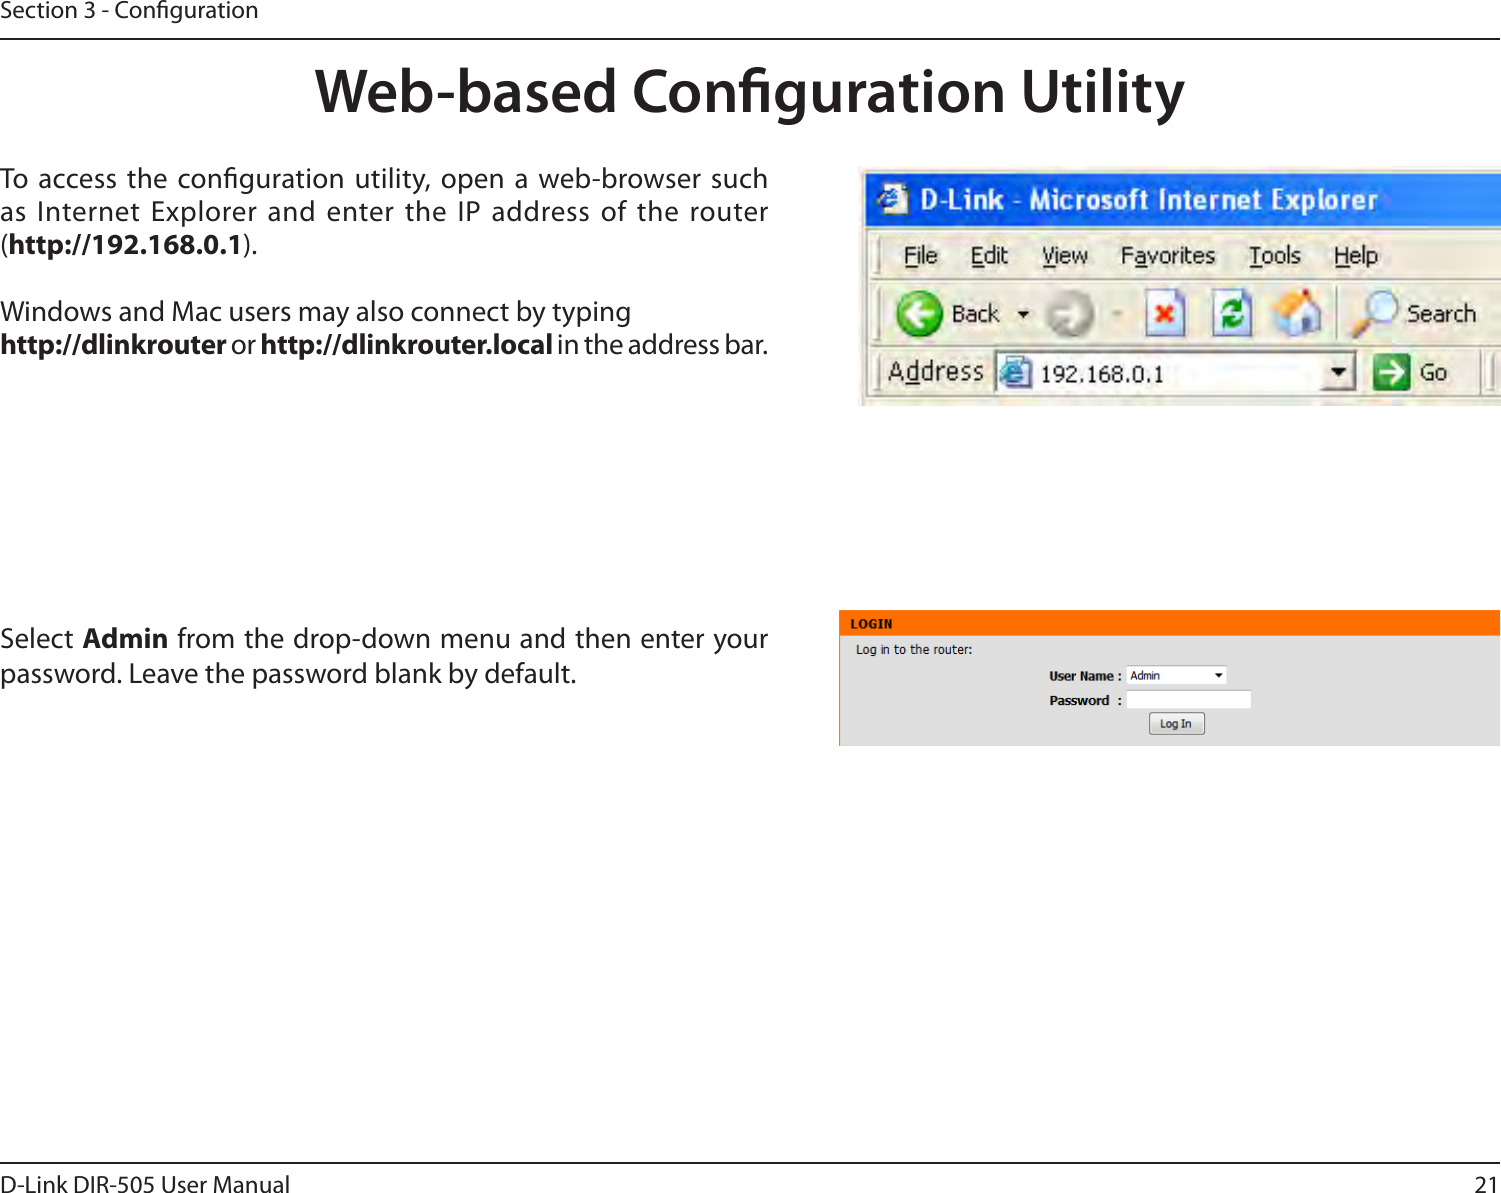 21D-Link DIR-505 User ManualSection 3 - CongurationWeb-based Conguration UtilitySelect Admin from the drop-down menu and then enter your password. Leave the password blank by default.To  access the  conguration utility, open a  web-browser such as Internet Explorer and  enter the  IP address of the router (http://192.168.0.1).Windows and Mac users may also connect by typinghttp://dlinkrouter or http://dlinkrouter.local in the address bar.